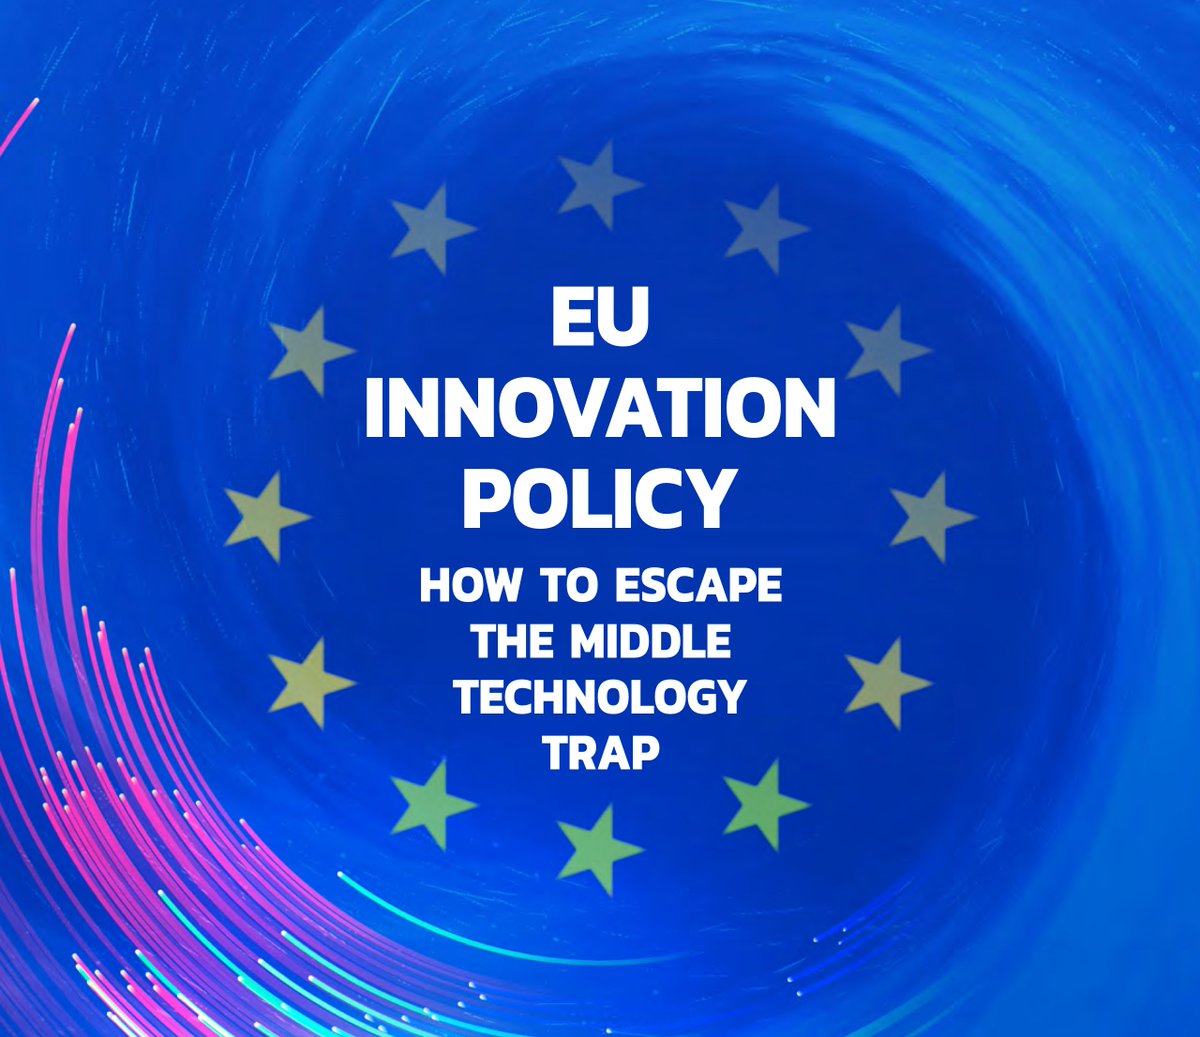 The EU spends not enough on R&D + concentrates on 'mid-tech sectors' such as automotive. To reverse the current trend, the EU should invest much more in 'breakthrough innovations' + support high-tech projects with low technological maturity. iep.unibocconi.eu/sites/default/… @FuestClemens